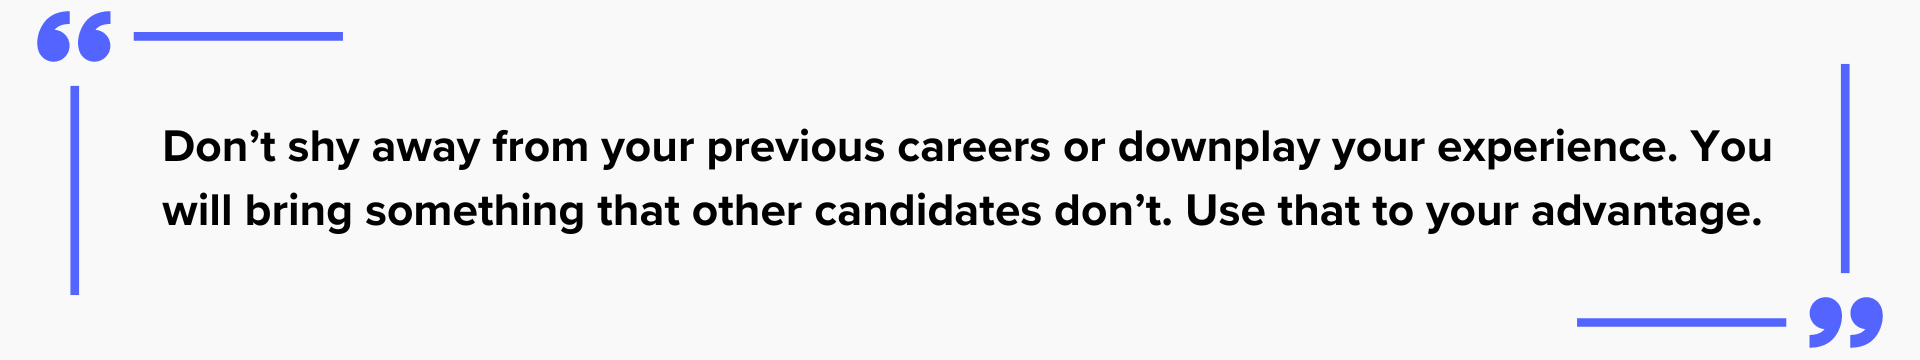 How to Change Careers: Don't shy away from your previous careers or downplay your experience. 